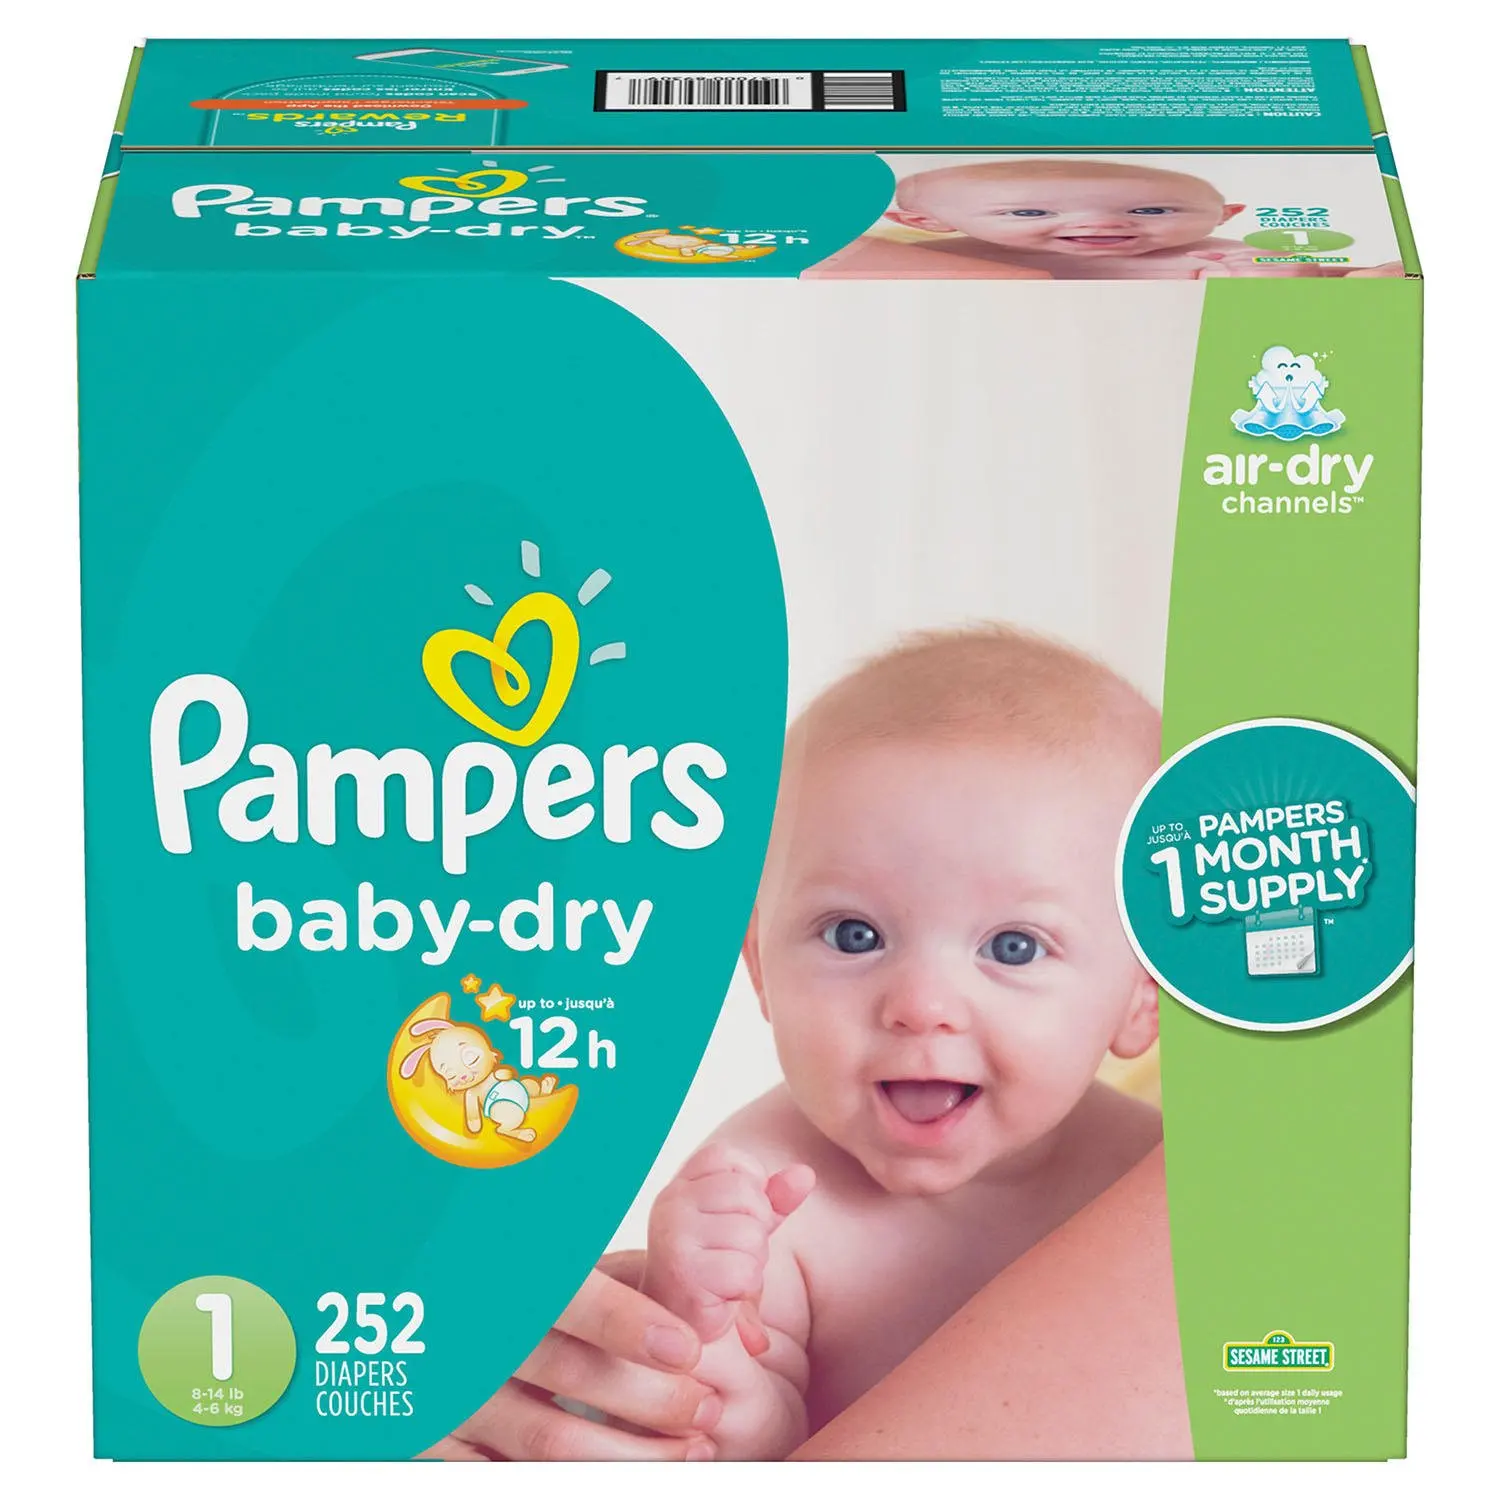 plak Ziektecijfers Bedenken Diapers Size 1 (8-14 Lbs) Newborn,198 Count - Pampers Swaddlers Disposable  Baby Diapers,One Month` - Buy Sell Baby Pampers | Pampers Premium  Protection | Pampers Diapers,A Grade Disposable Good Quality Pampers Baby